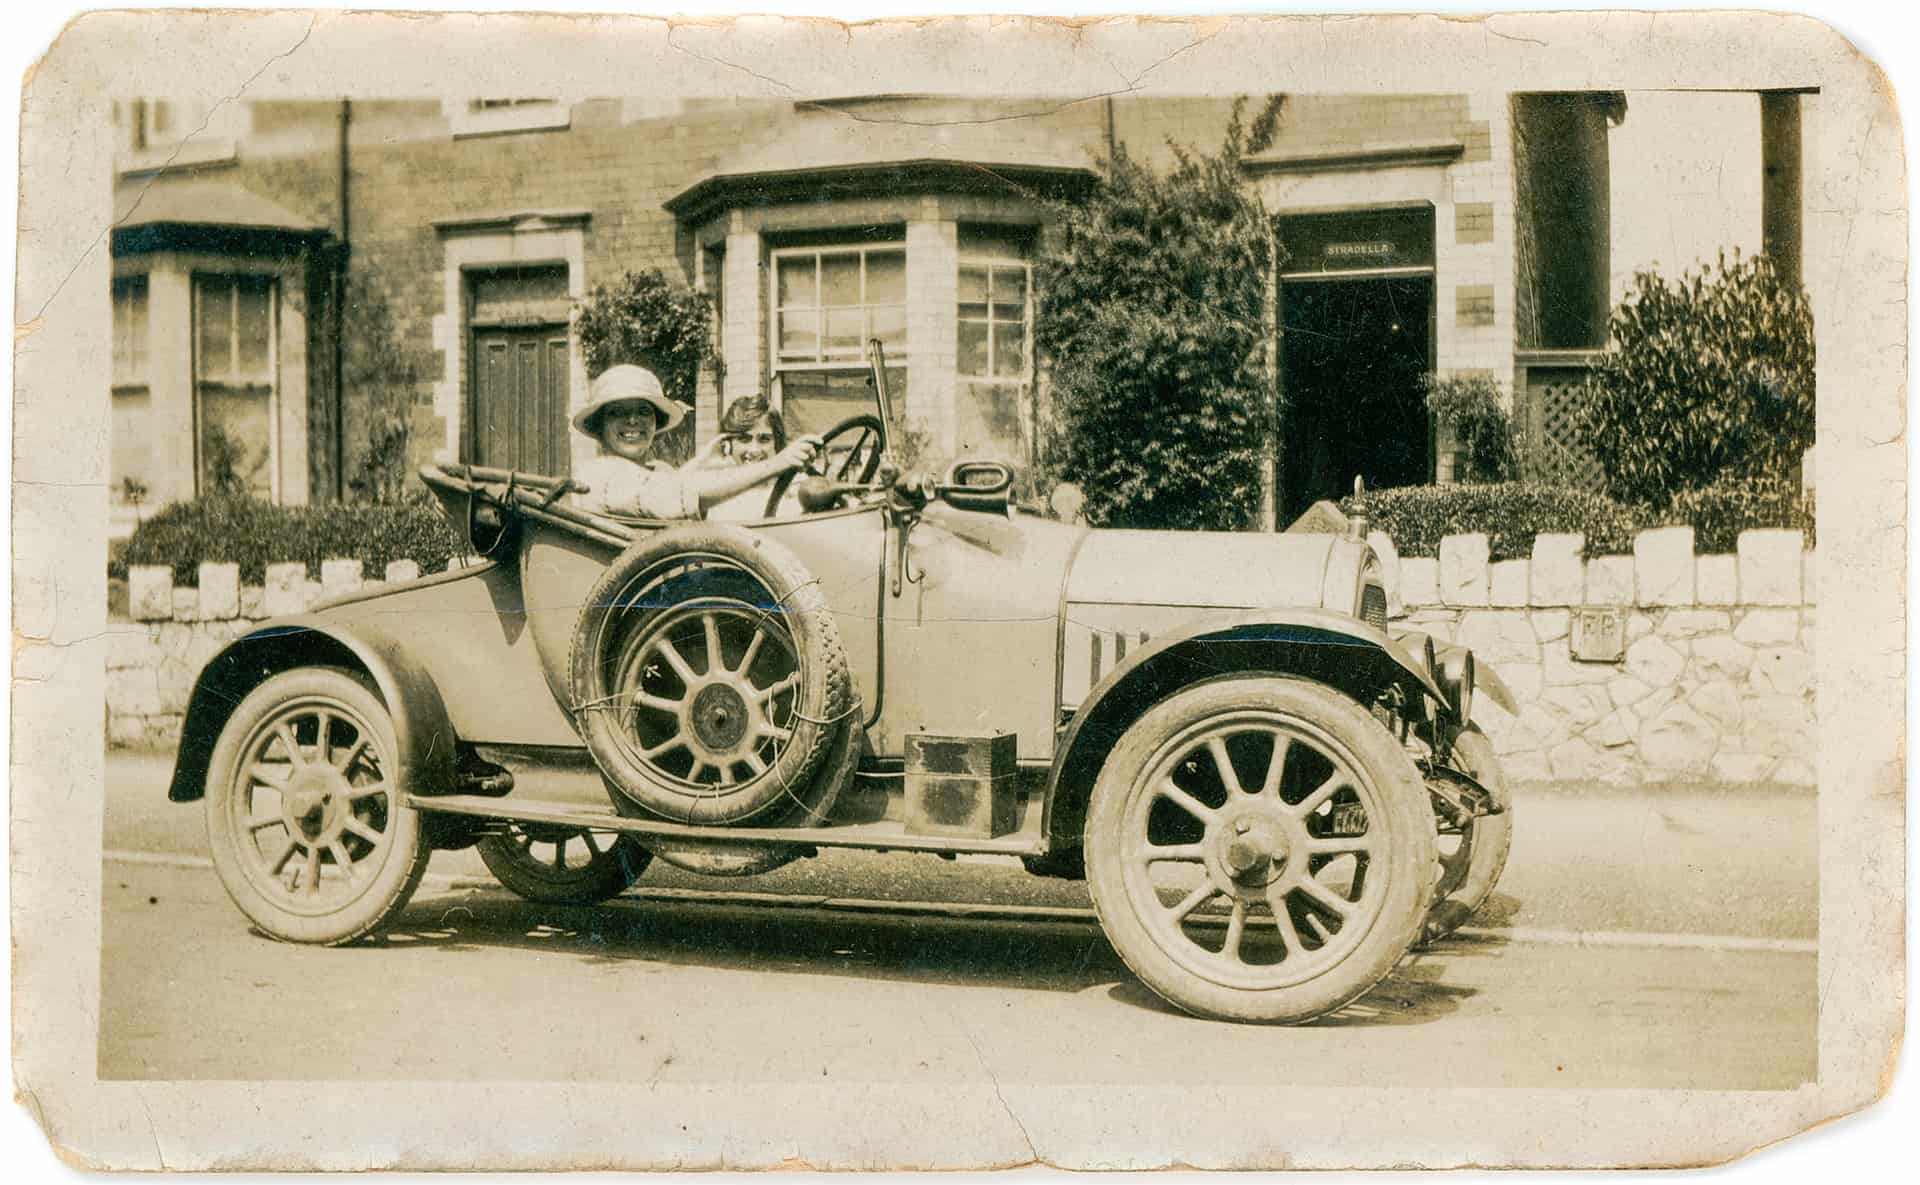 My grandmother in an 11.9 hp Bean two-seat tourer made in Tipton. Mid-1920s